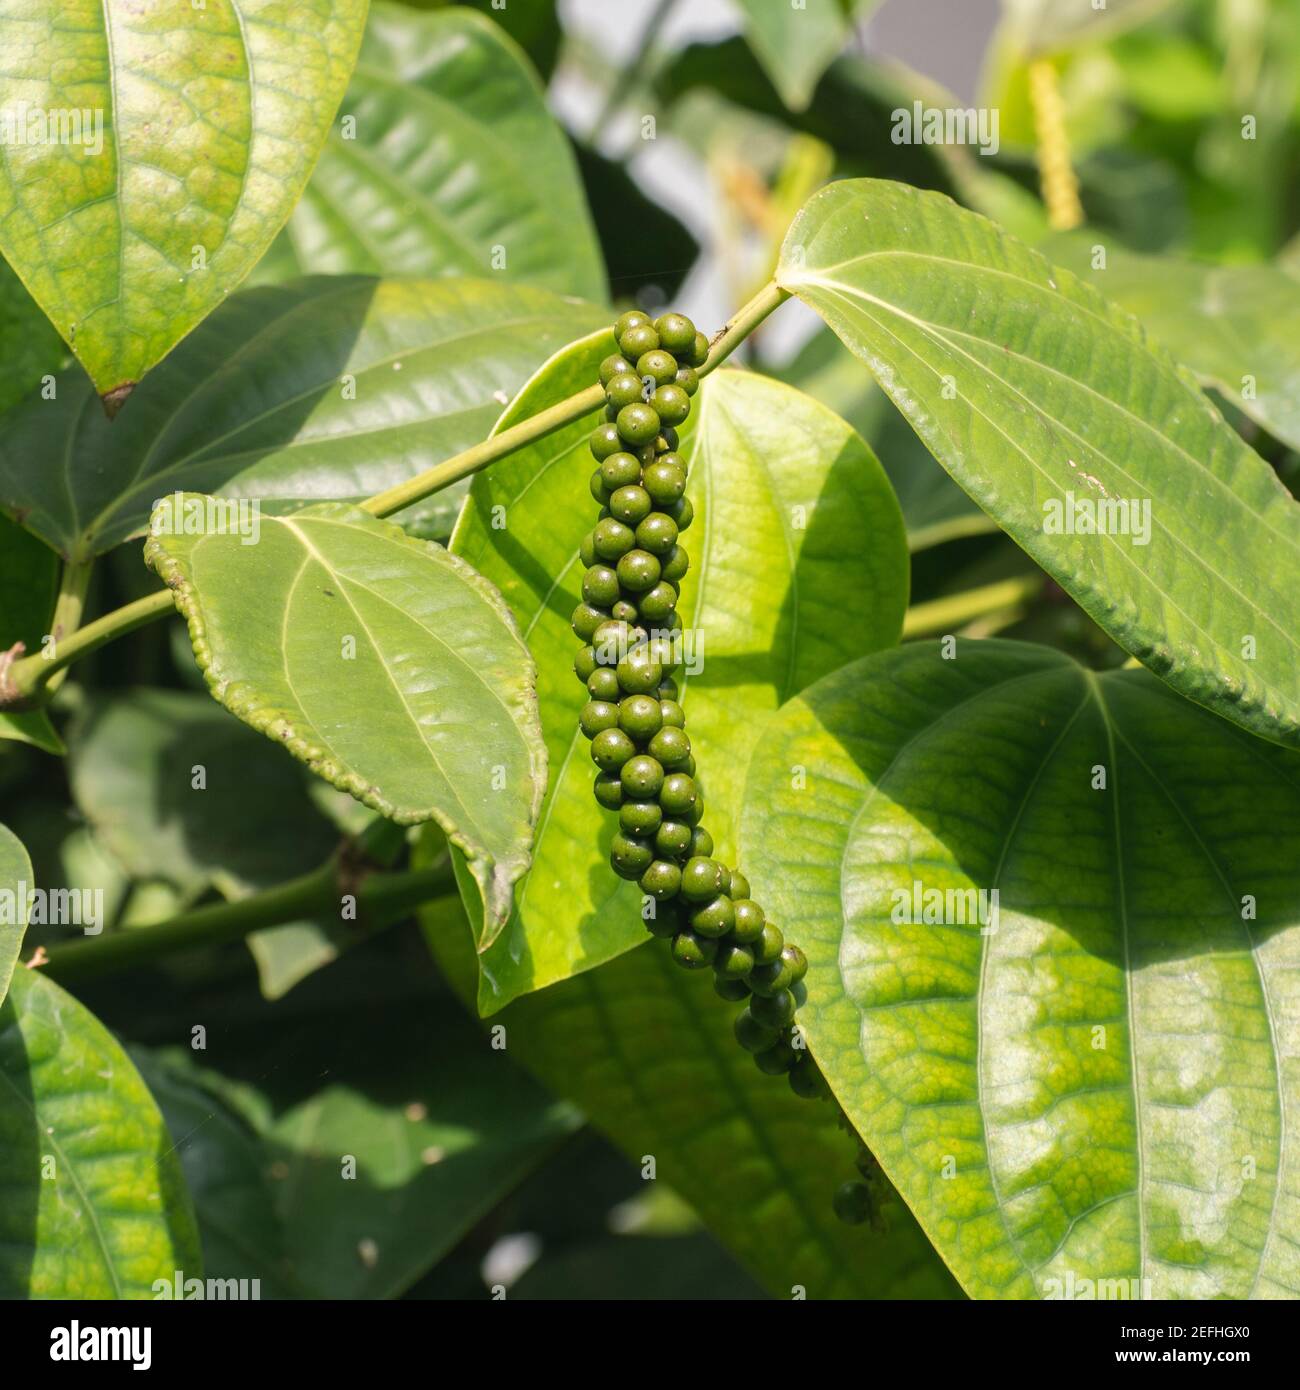 Black Pepper Plant Fresh Green Leaves Glow Tree Stock Photo, Picture and  Royalty Free Image. Image 141828423.